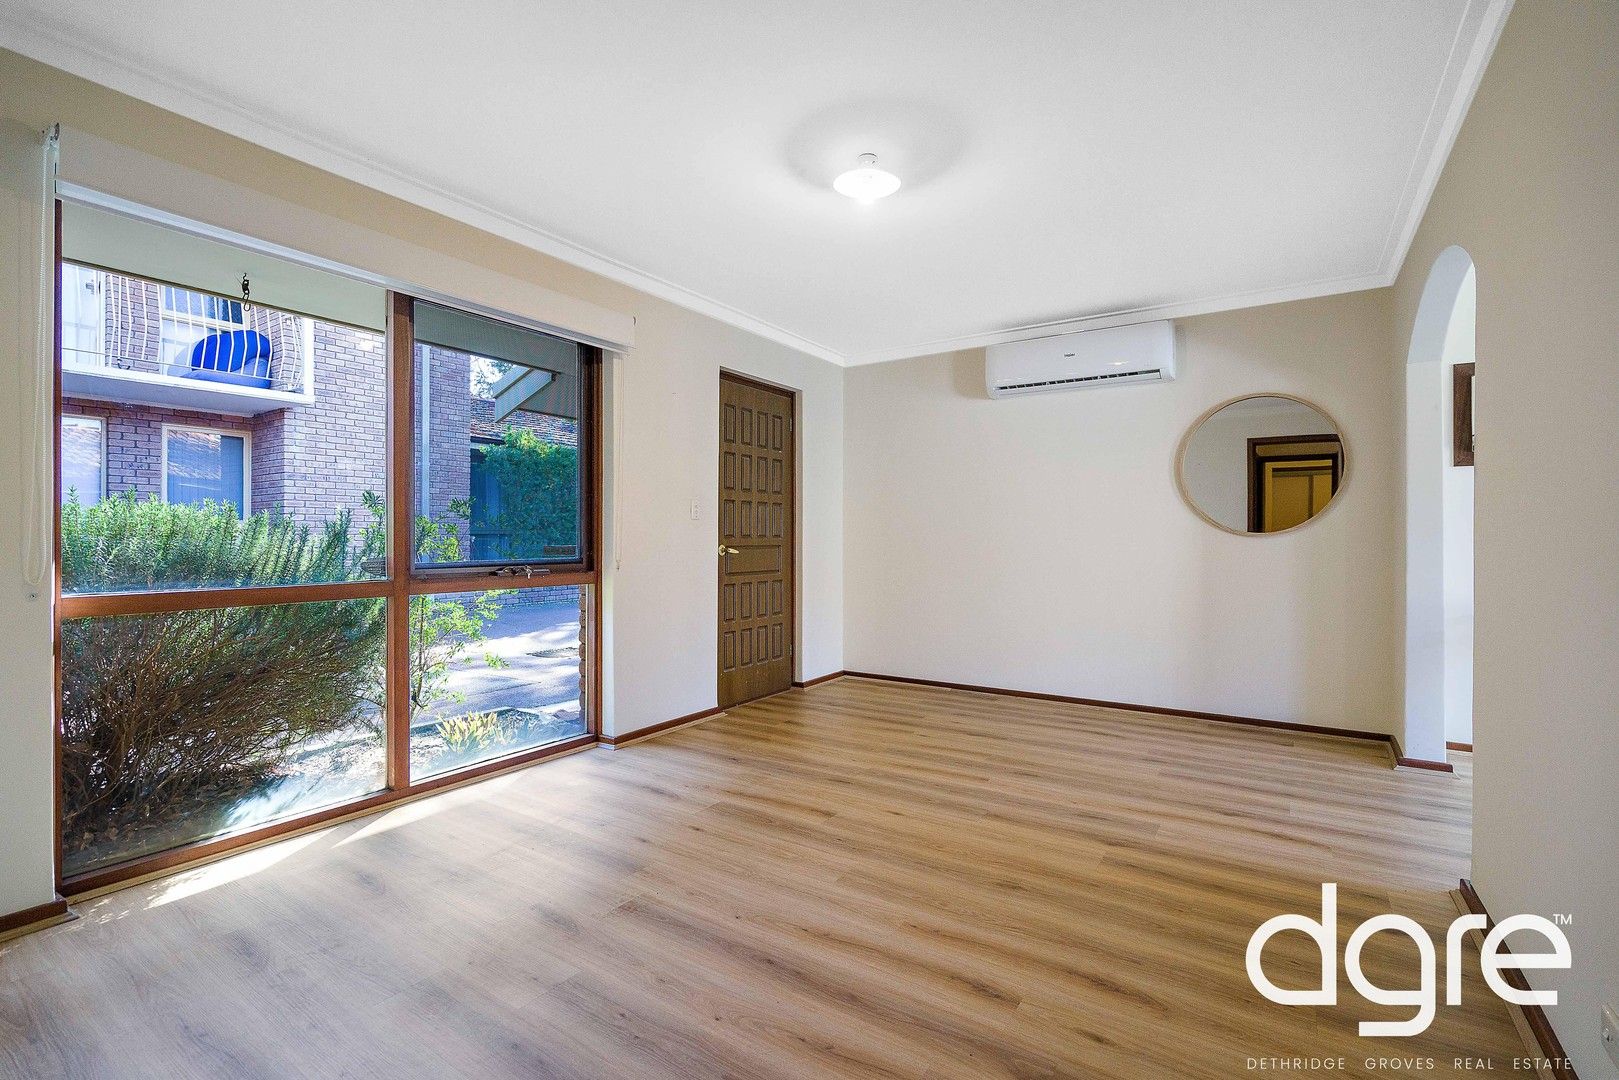 2 bedrooms Apartment / Unit / Flat in 13/370 Marmion Street MELVILLE WA, 6156